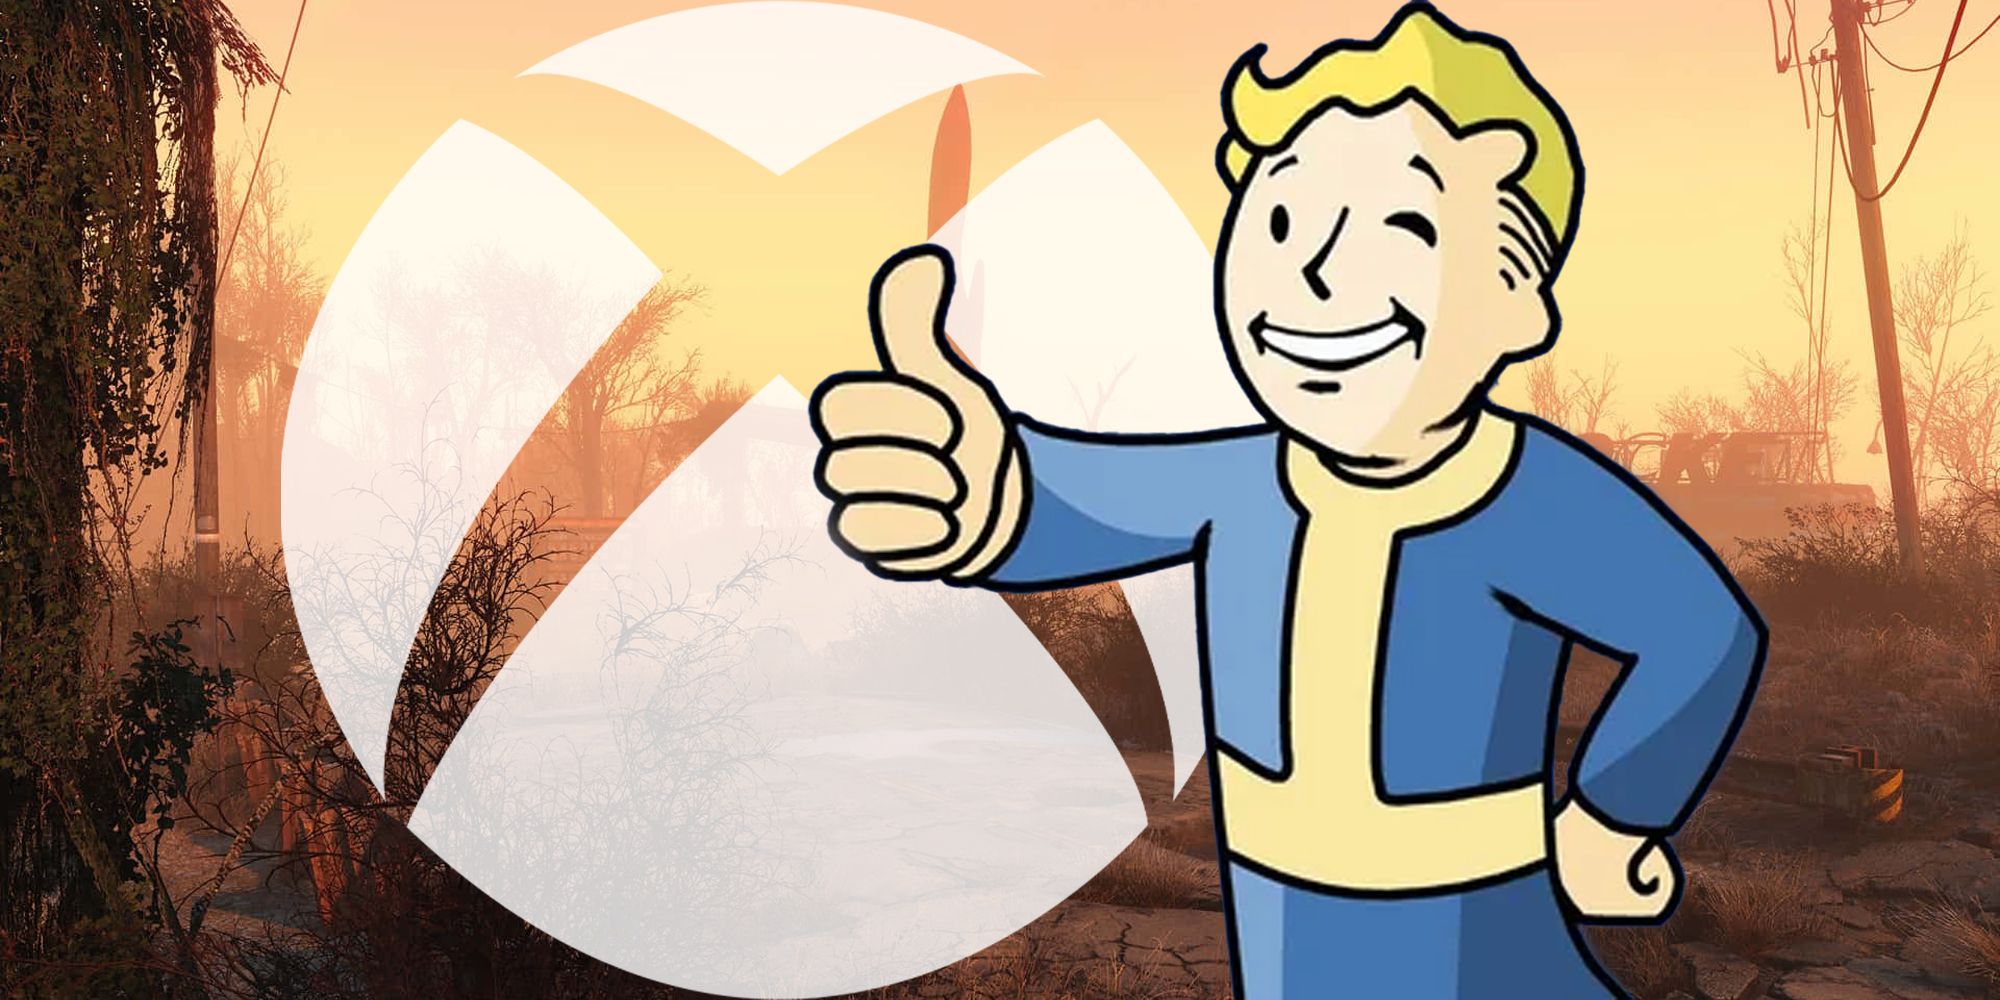 Fallout 4 - Vault Boy thumbs up with Xbox logo